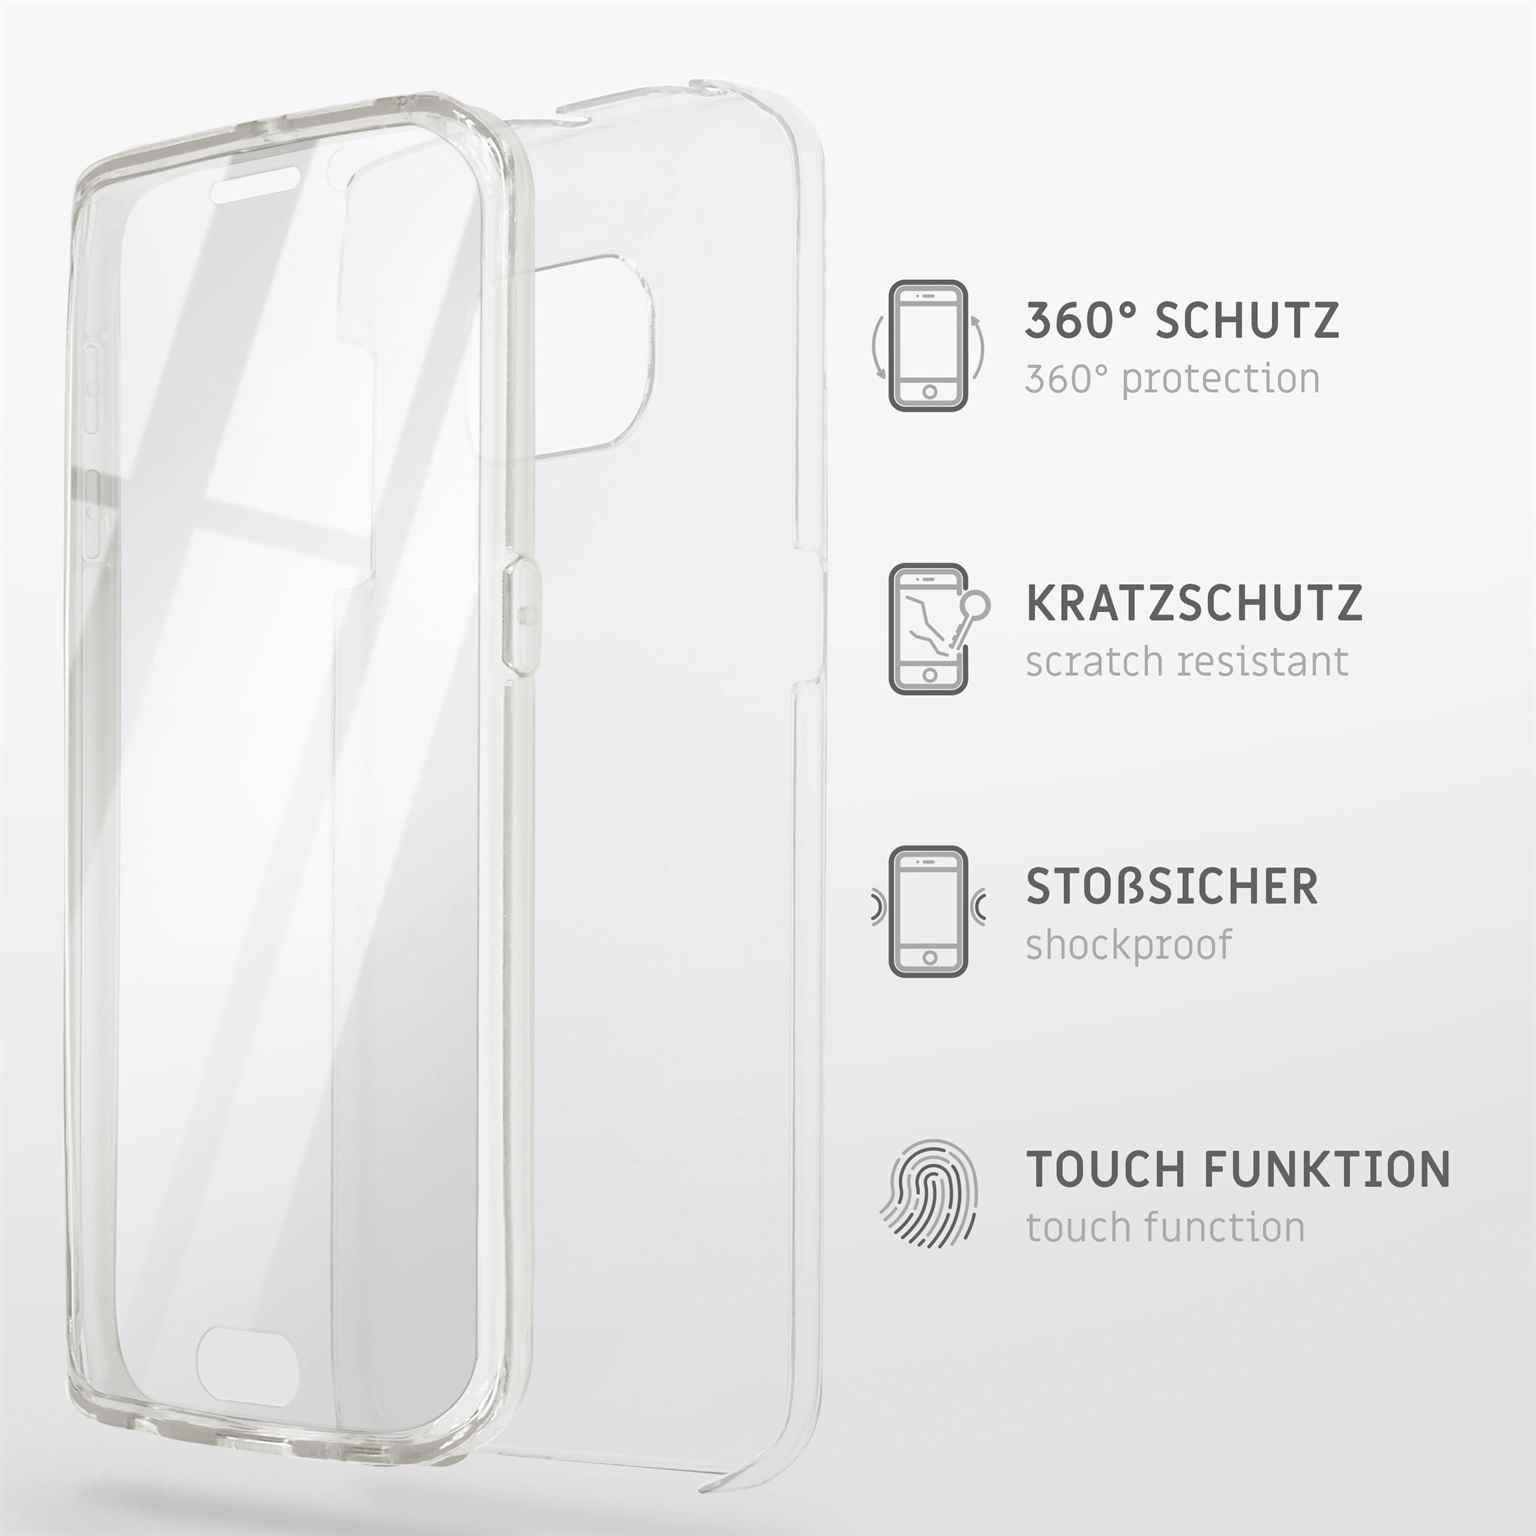 ONEFLOW Touch A5 Full Ultra-Clear (2016), Galaxy Case, Samsung, Cover